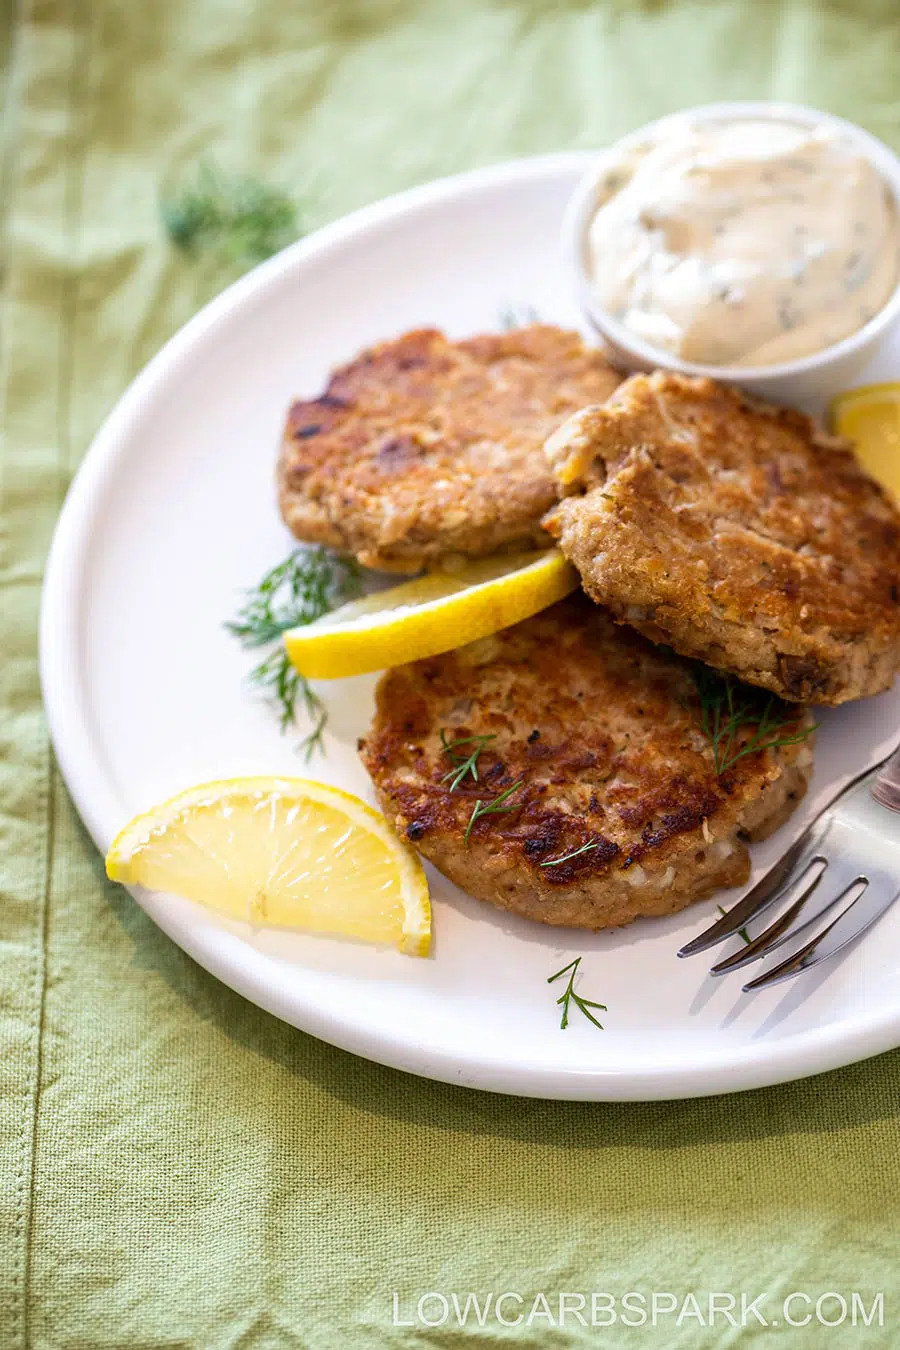 These keto tuna cakes are made with juicy canned tuna and served with a delicious lemon dill aioli sauce. They are super easy to make, ready in 20 minutes with simple ingredients. Plus, these tuna patties are gluten-free, sugar-free, and grain-free.